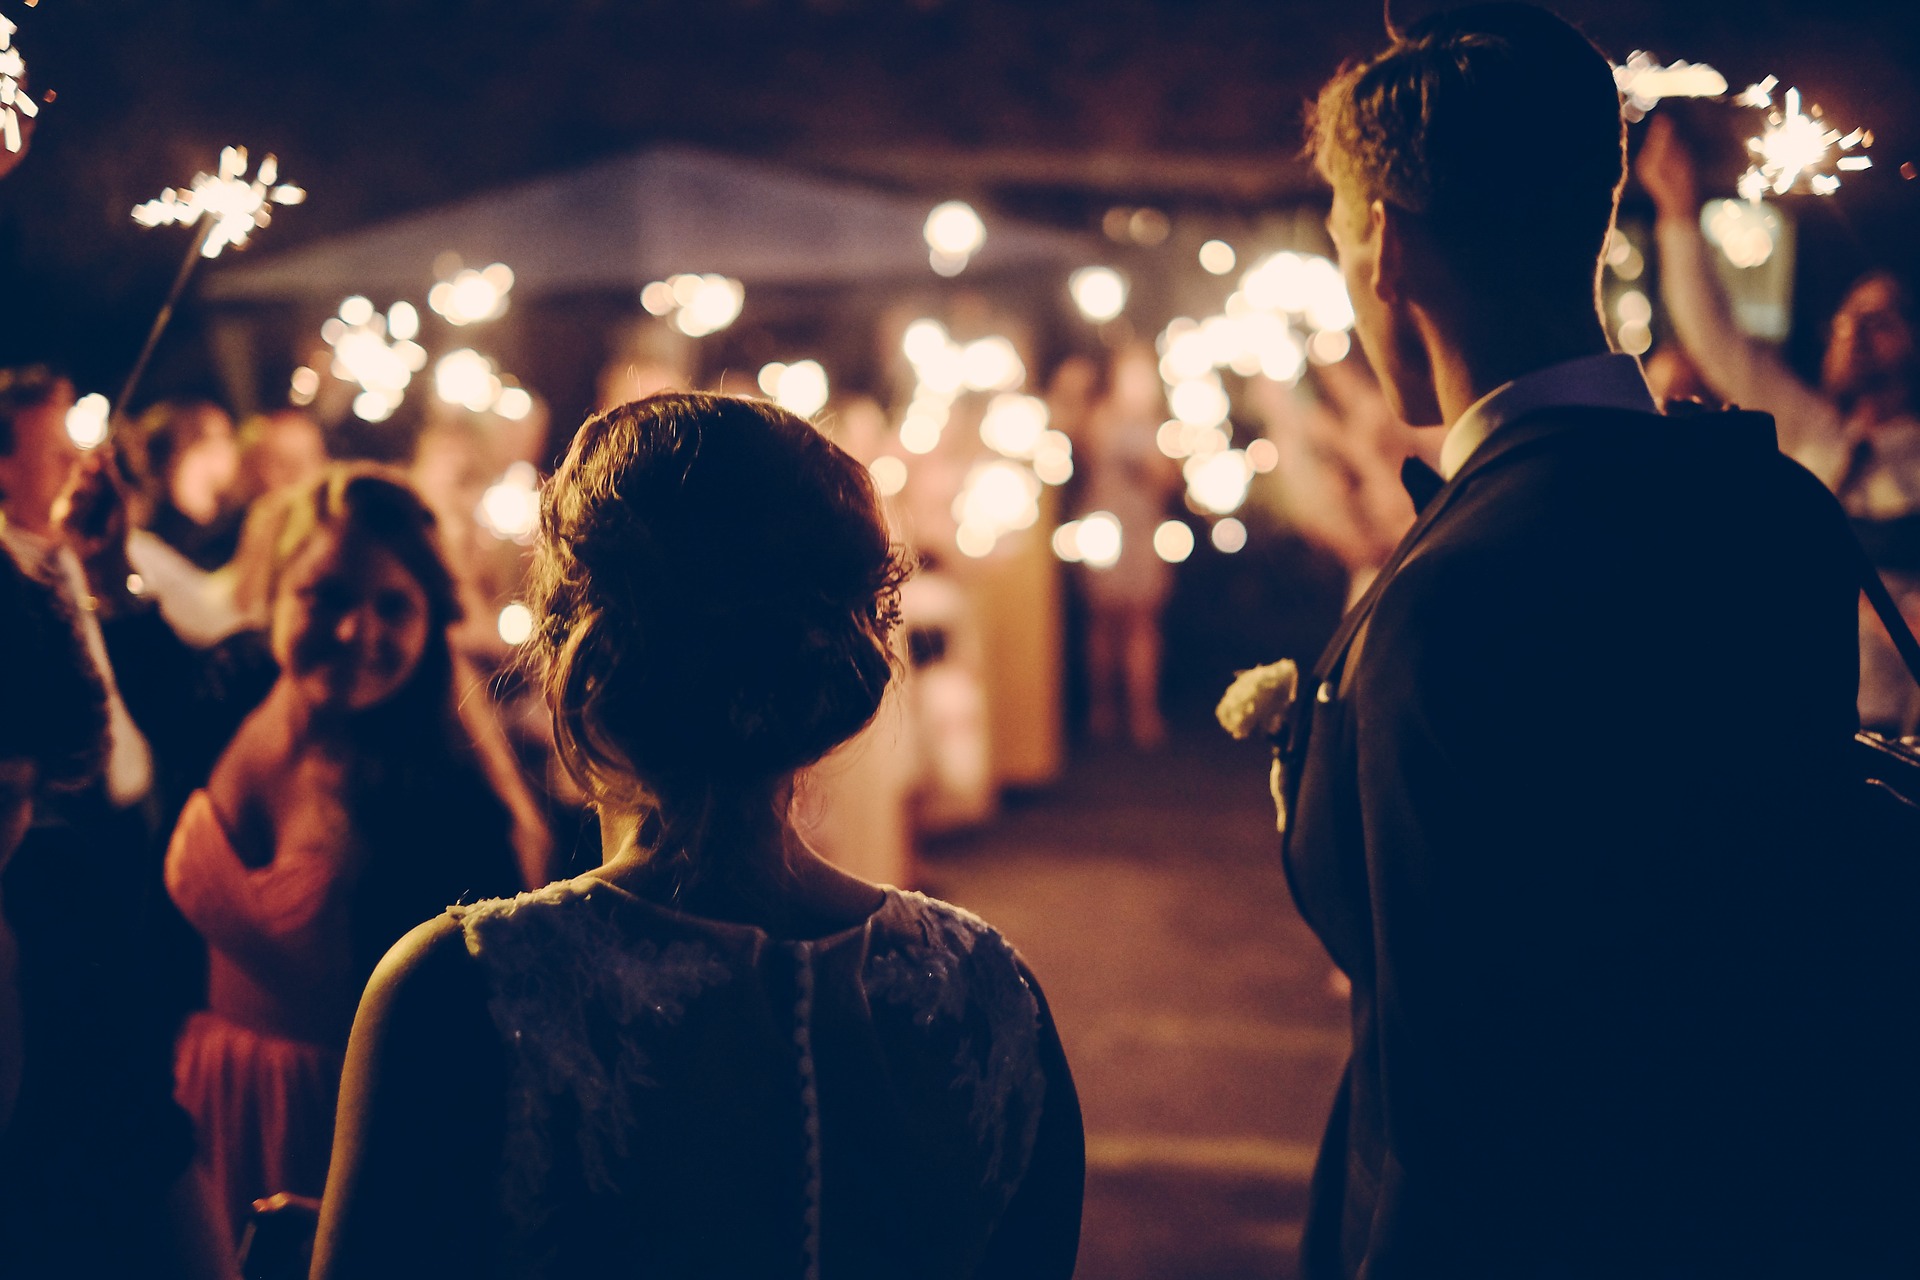 A bride and groom staring at a woman in a pink dress at a wedding. The woman in the pink dress is welcoming with a bright smile. It's evening, and the lighting is dim, provided by string lights.